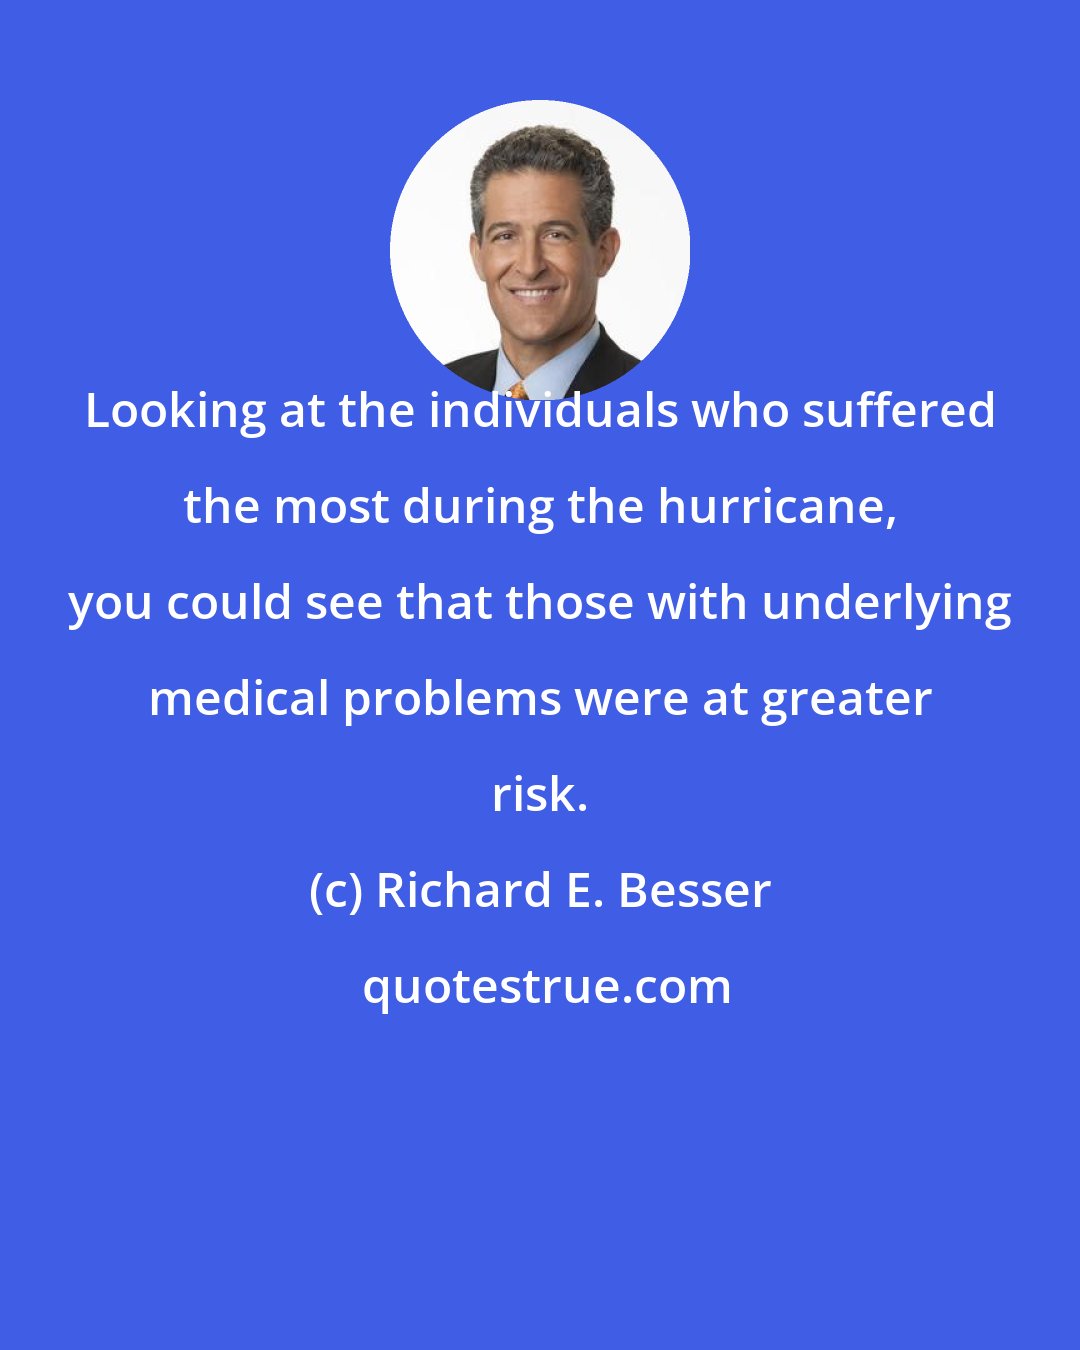 Richard E. Besser: Looking at the individuals who suffered the most during the hurricane, you could see that those with underlying medical problems were at greater risk.